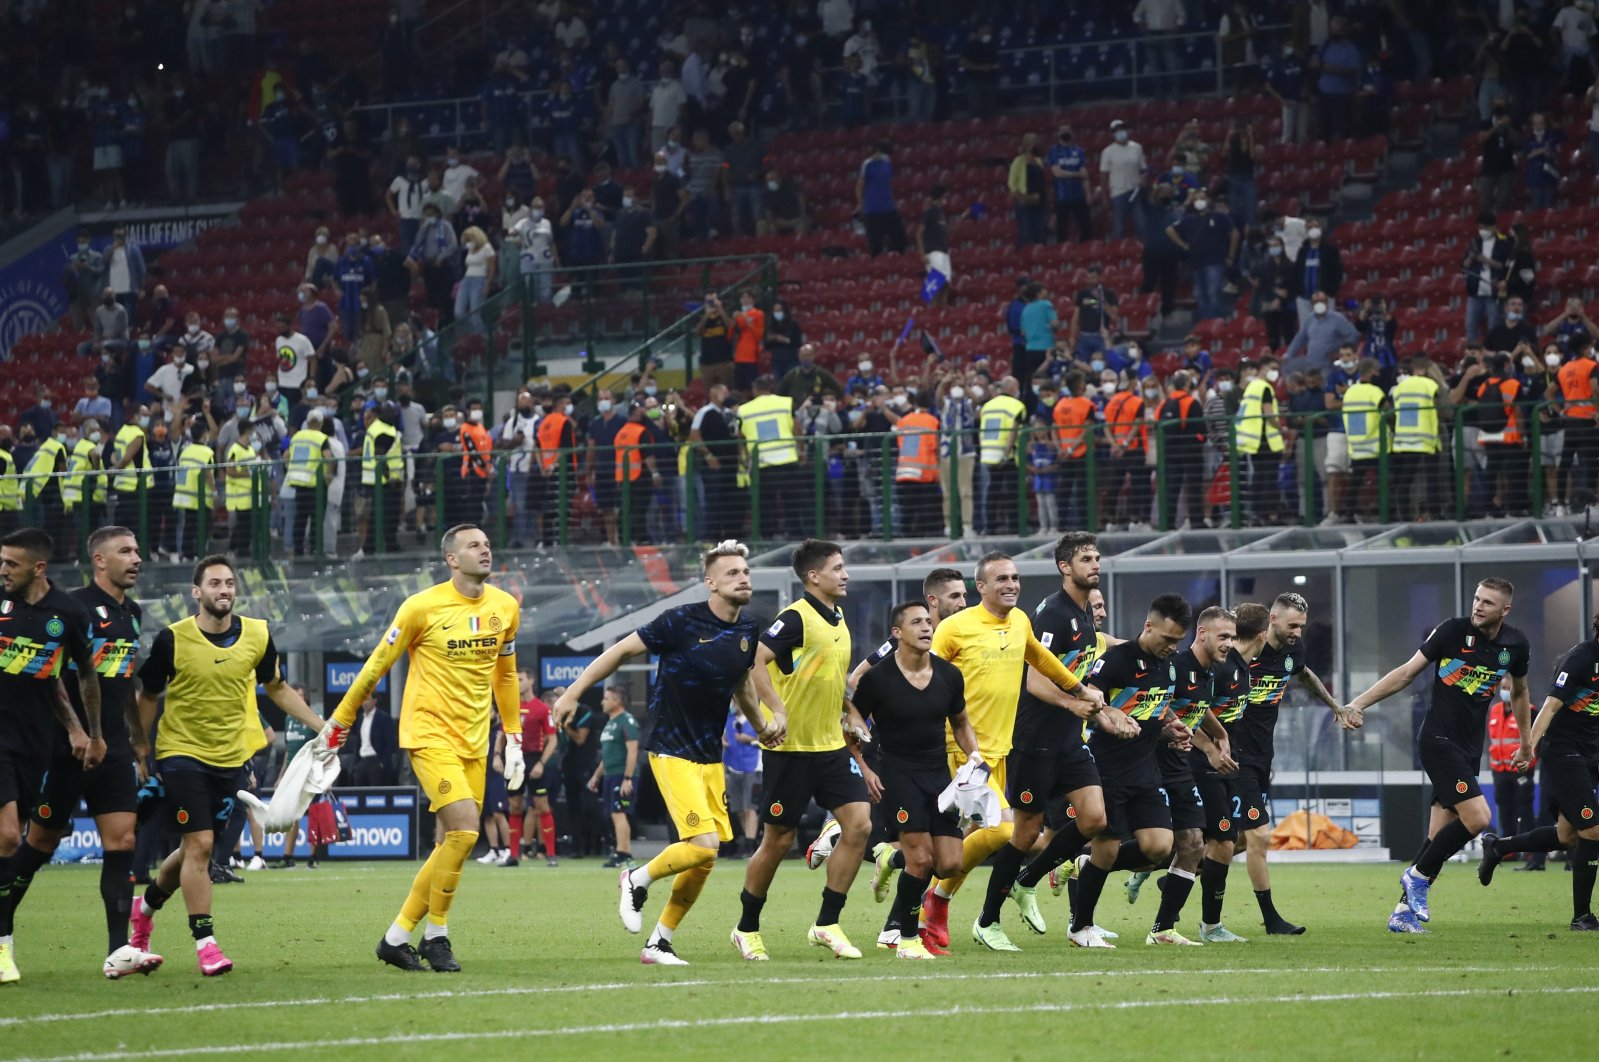 Inter Milan players celebrate after the Italian Serie A match against Bologna at the San Siro Stadium, in Milan, Italy, Sept. 18, 2021. (Reuters Photo)